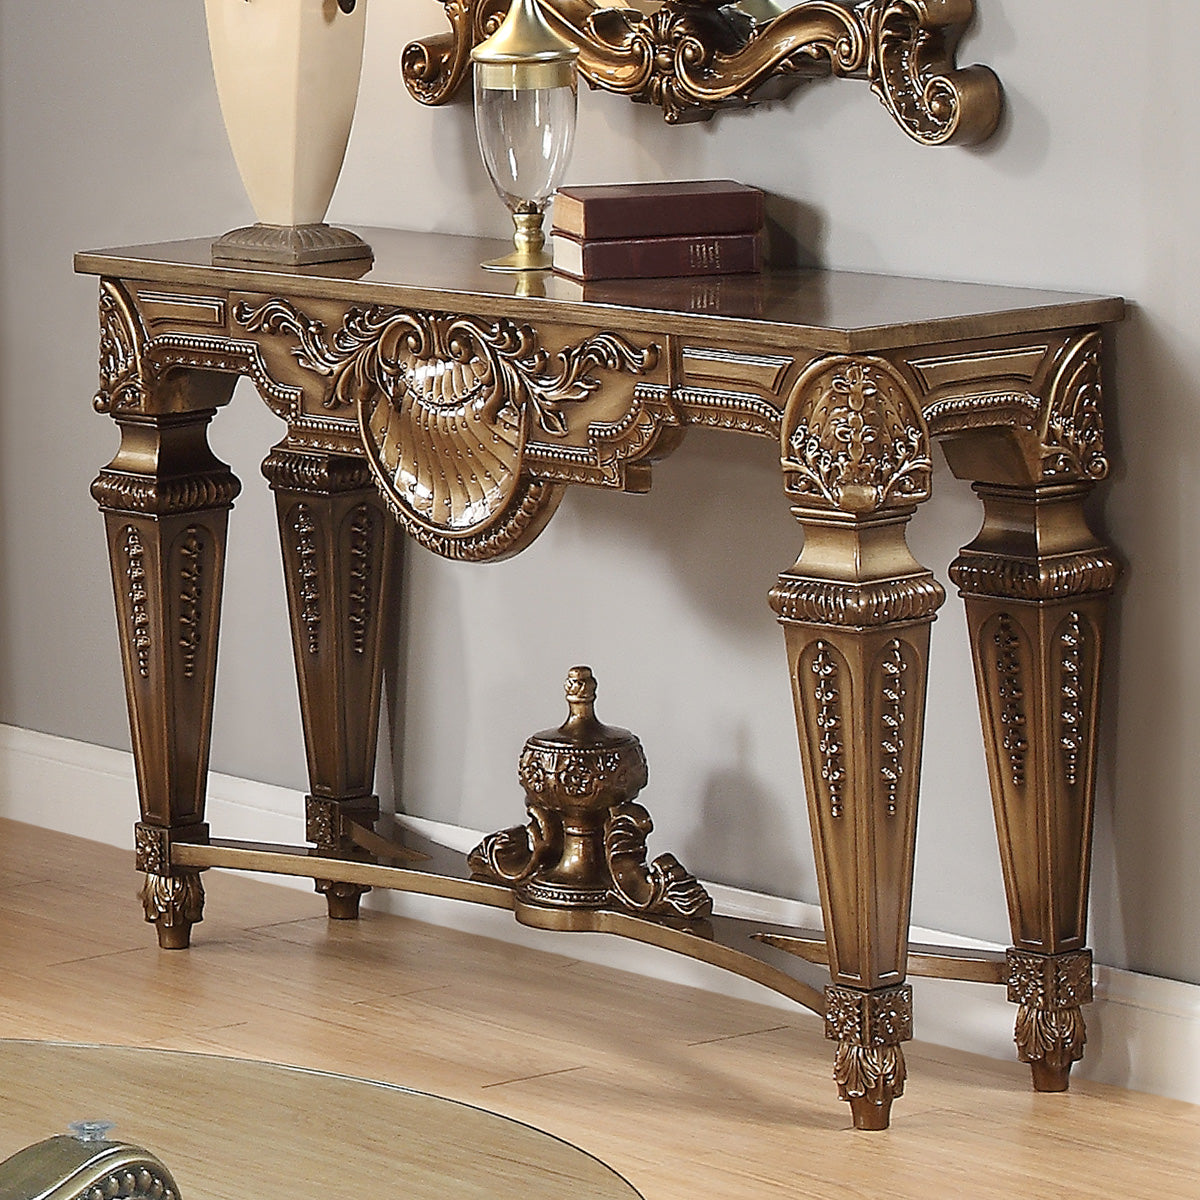 Homey Design HD-8908B - CONSOLE TABLE - New Star Living